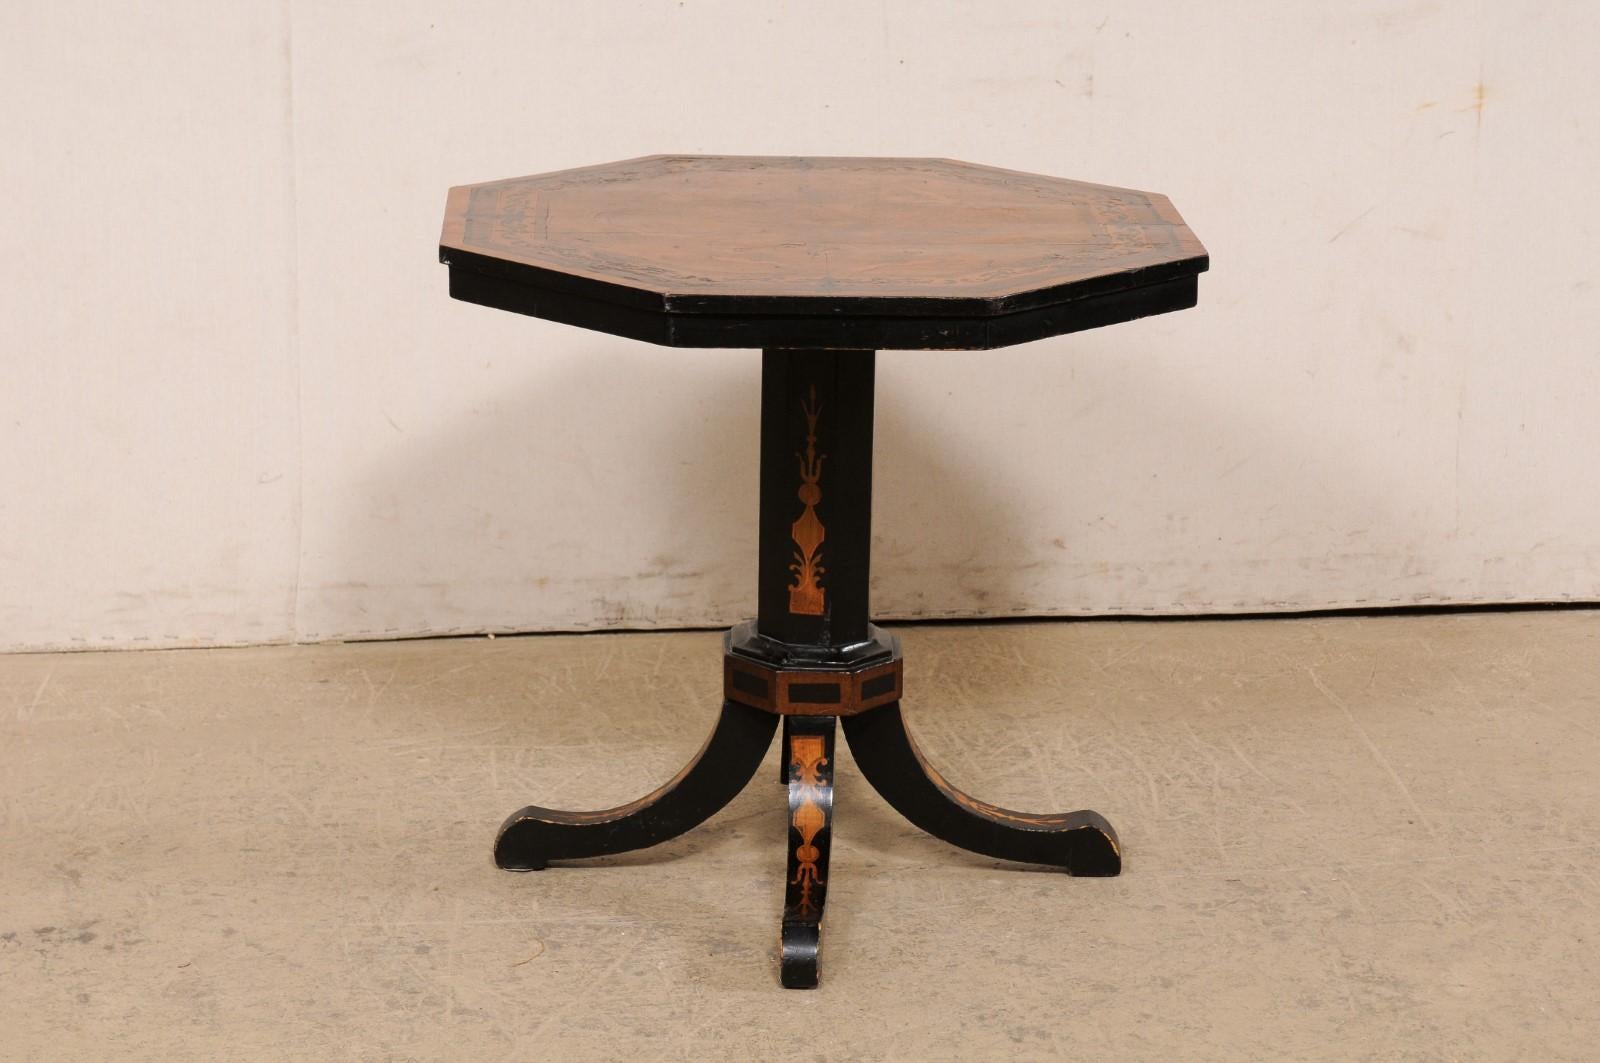 19th Century Octagonal Pedestal Table with Wonderful Inlay Embellishments 5